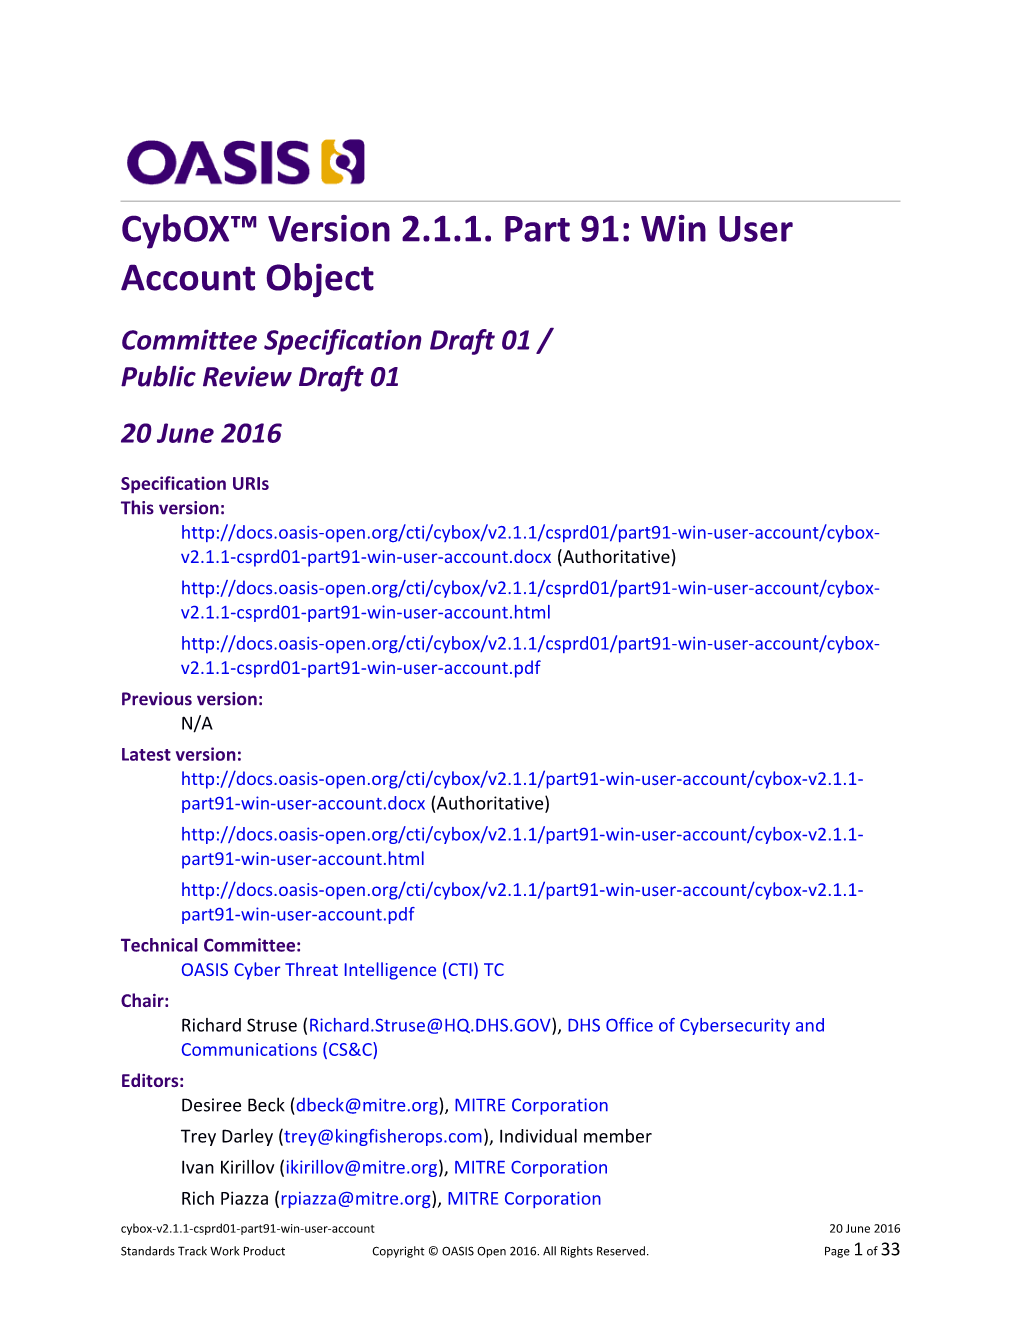 Cybox Version 2.1.1. Part 91: Win User Account Object